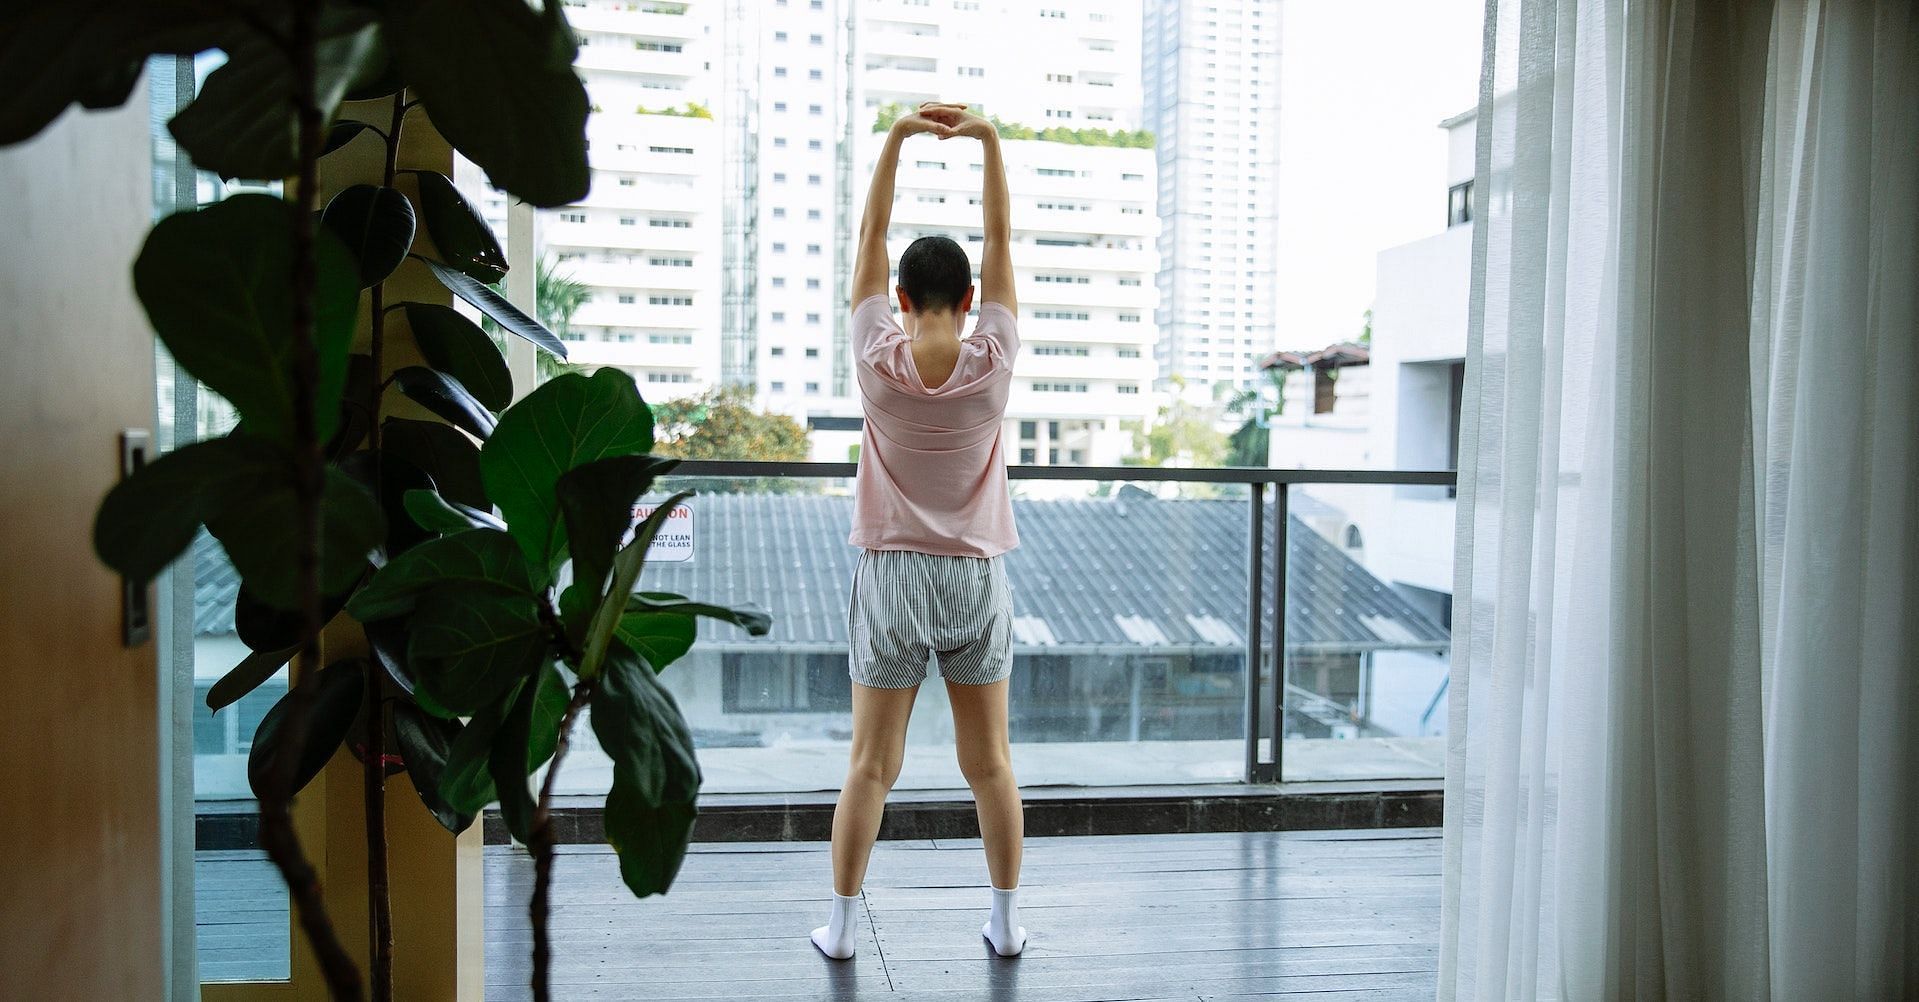 Overhead arm stretch is one of the best stretches for upper back pain. (Photo via Pexels/Michelle Leman)